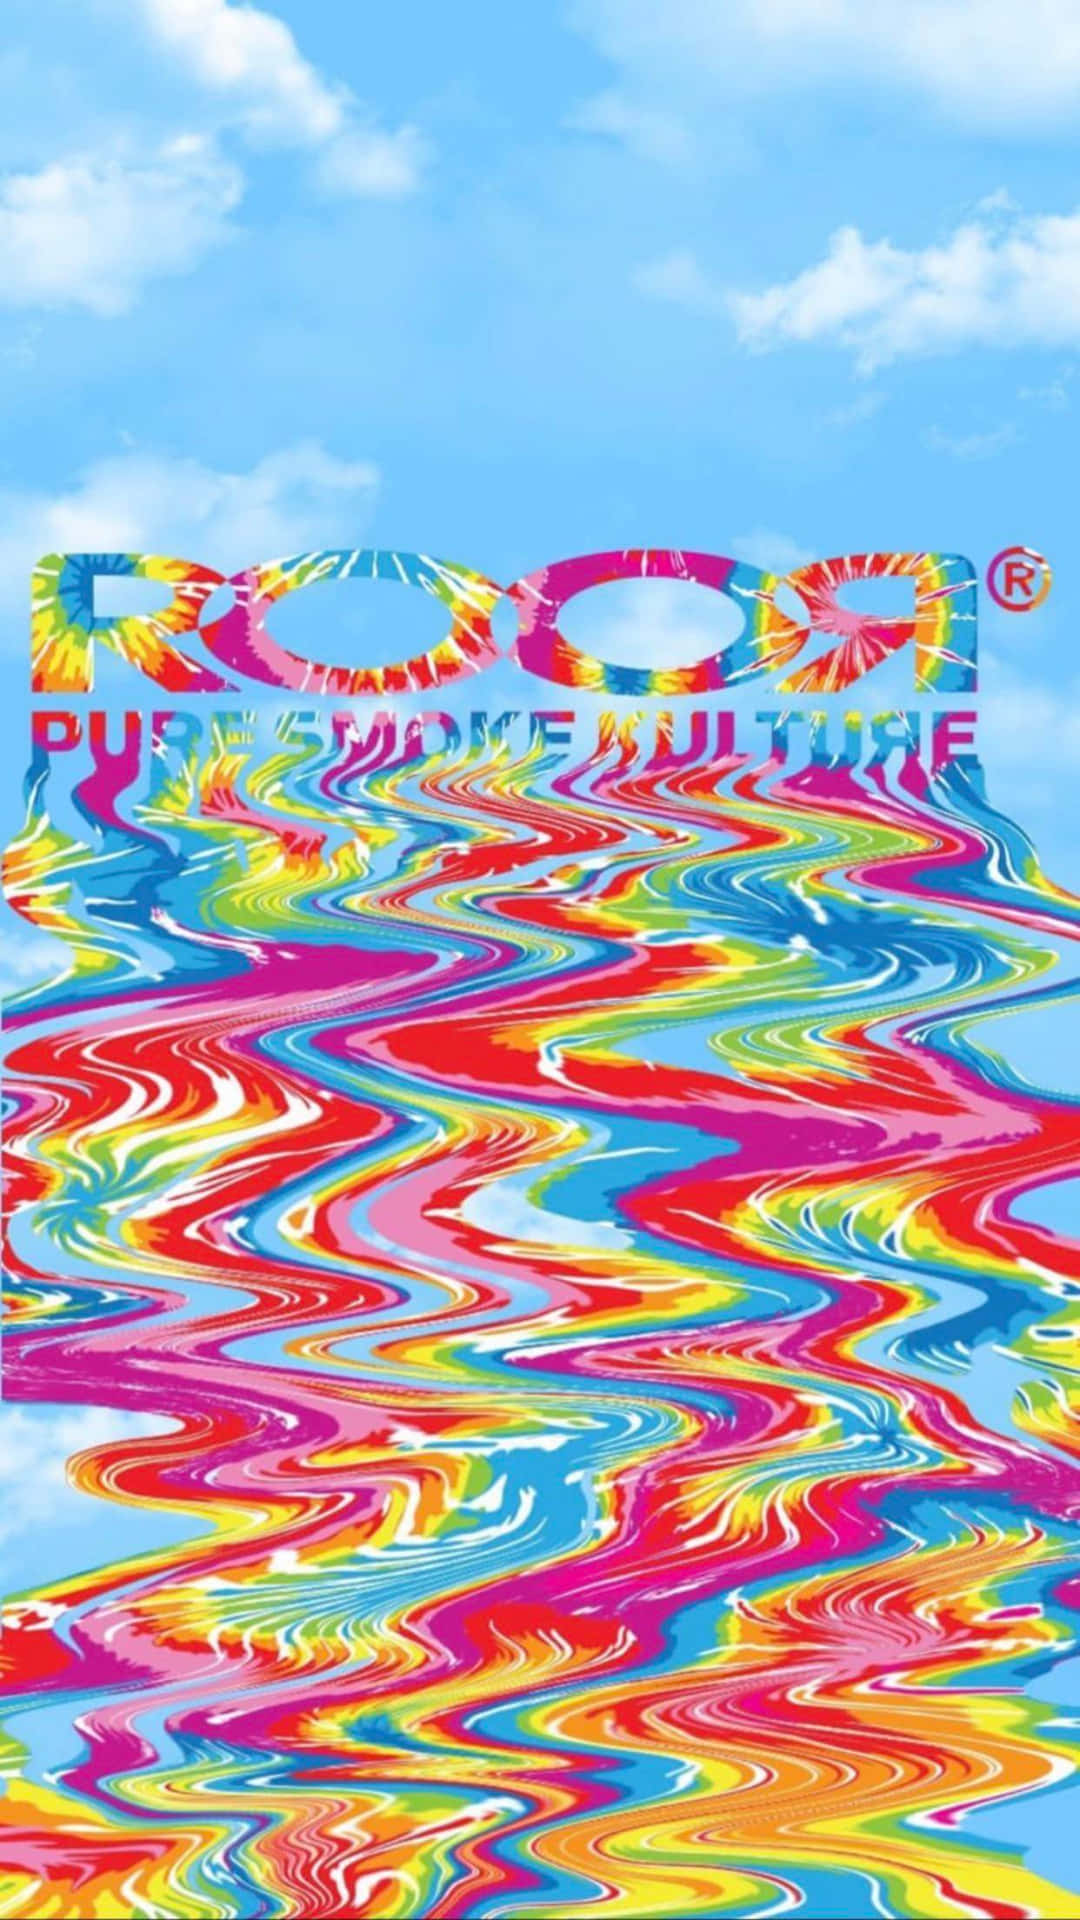 Psychedelic Rooh Afza Adverti Phone Wallpaper Wallpaper